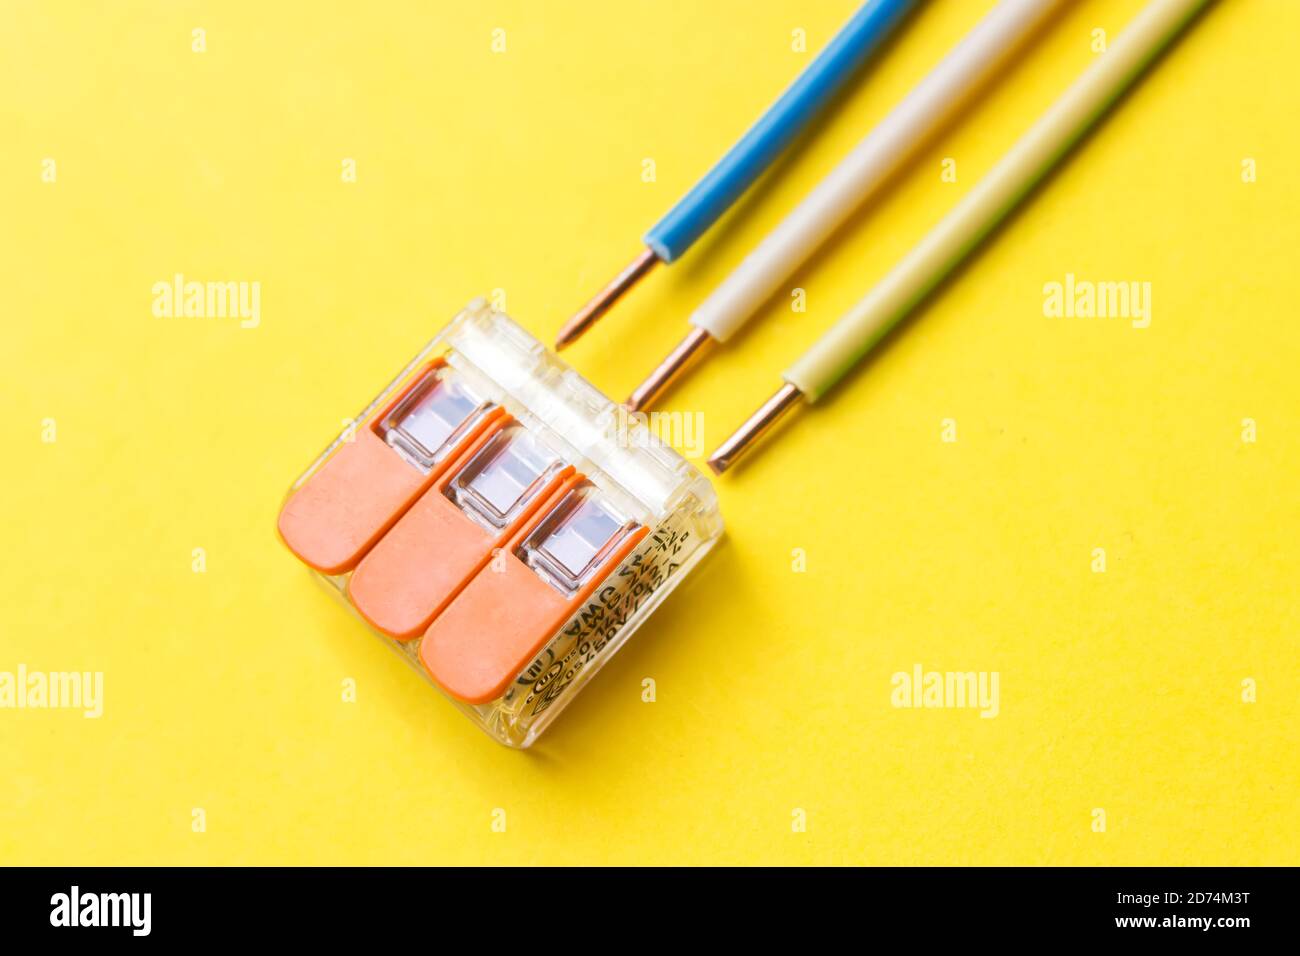 Compact splicing connector with wires phase, zero, ground on yellow background. Electronic components. Used for connecting wires without the need for Stock Photo